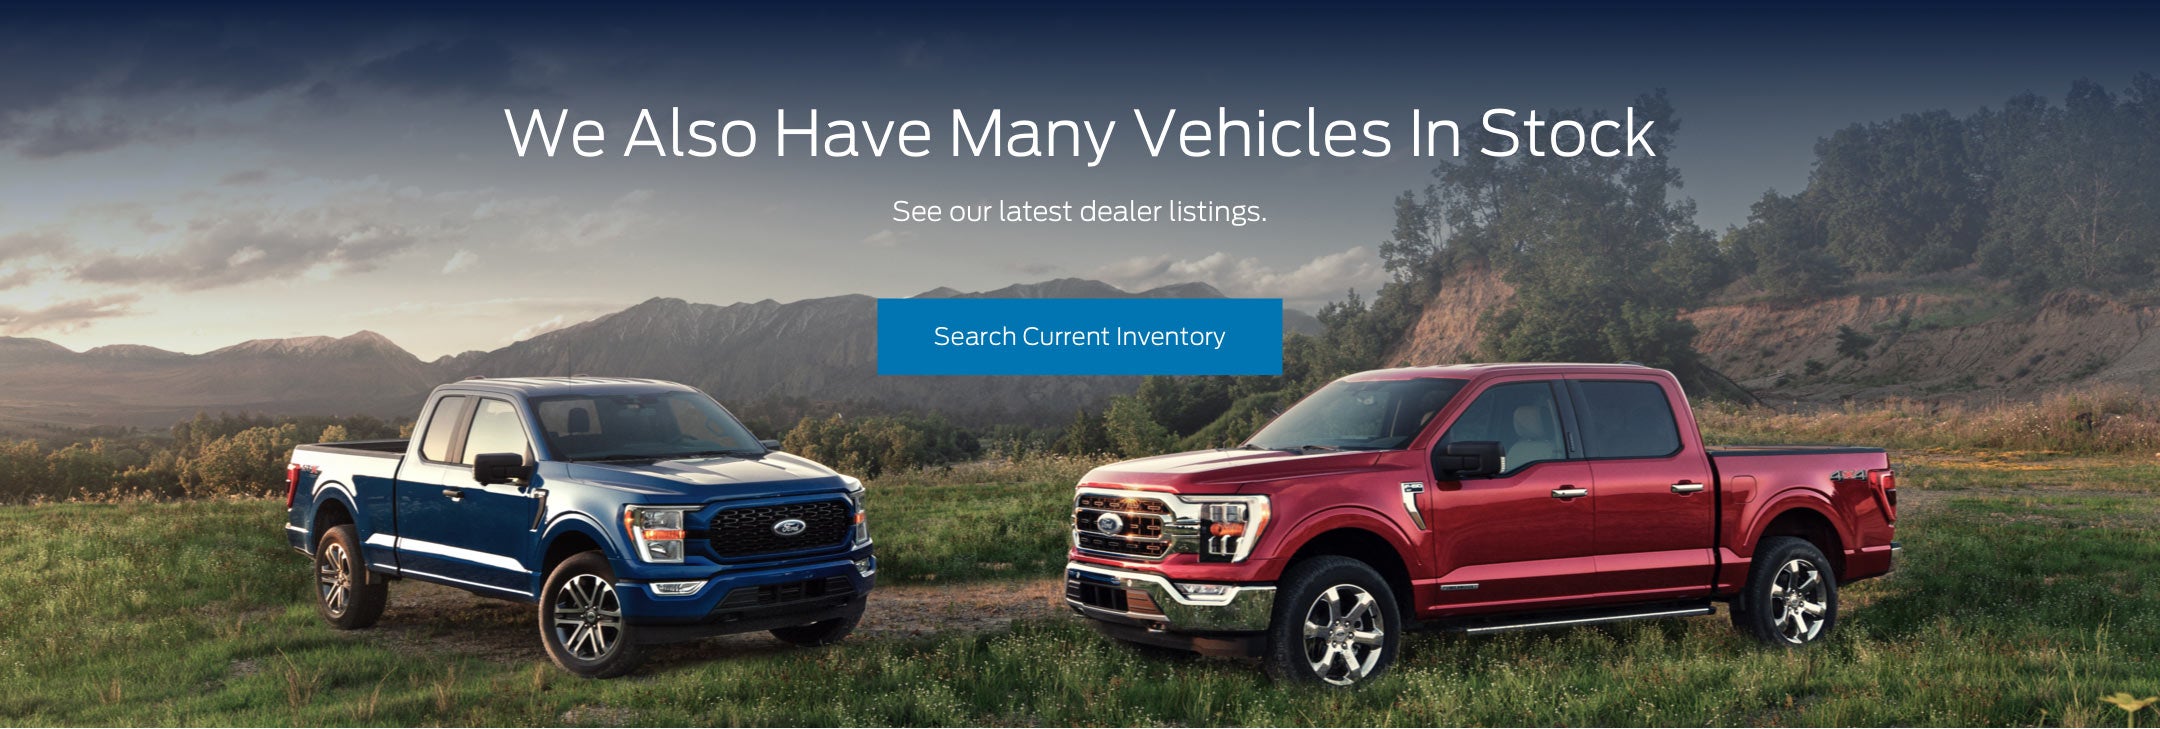 Ford vehicles in stock | John Kennedy Ford Feasterville in Feasterville PA